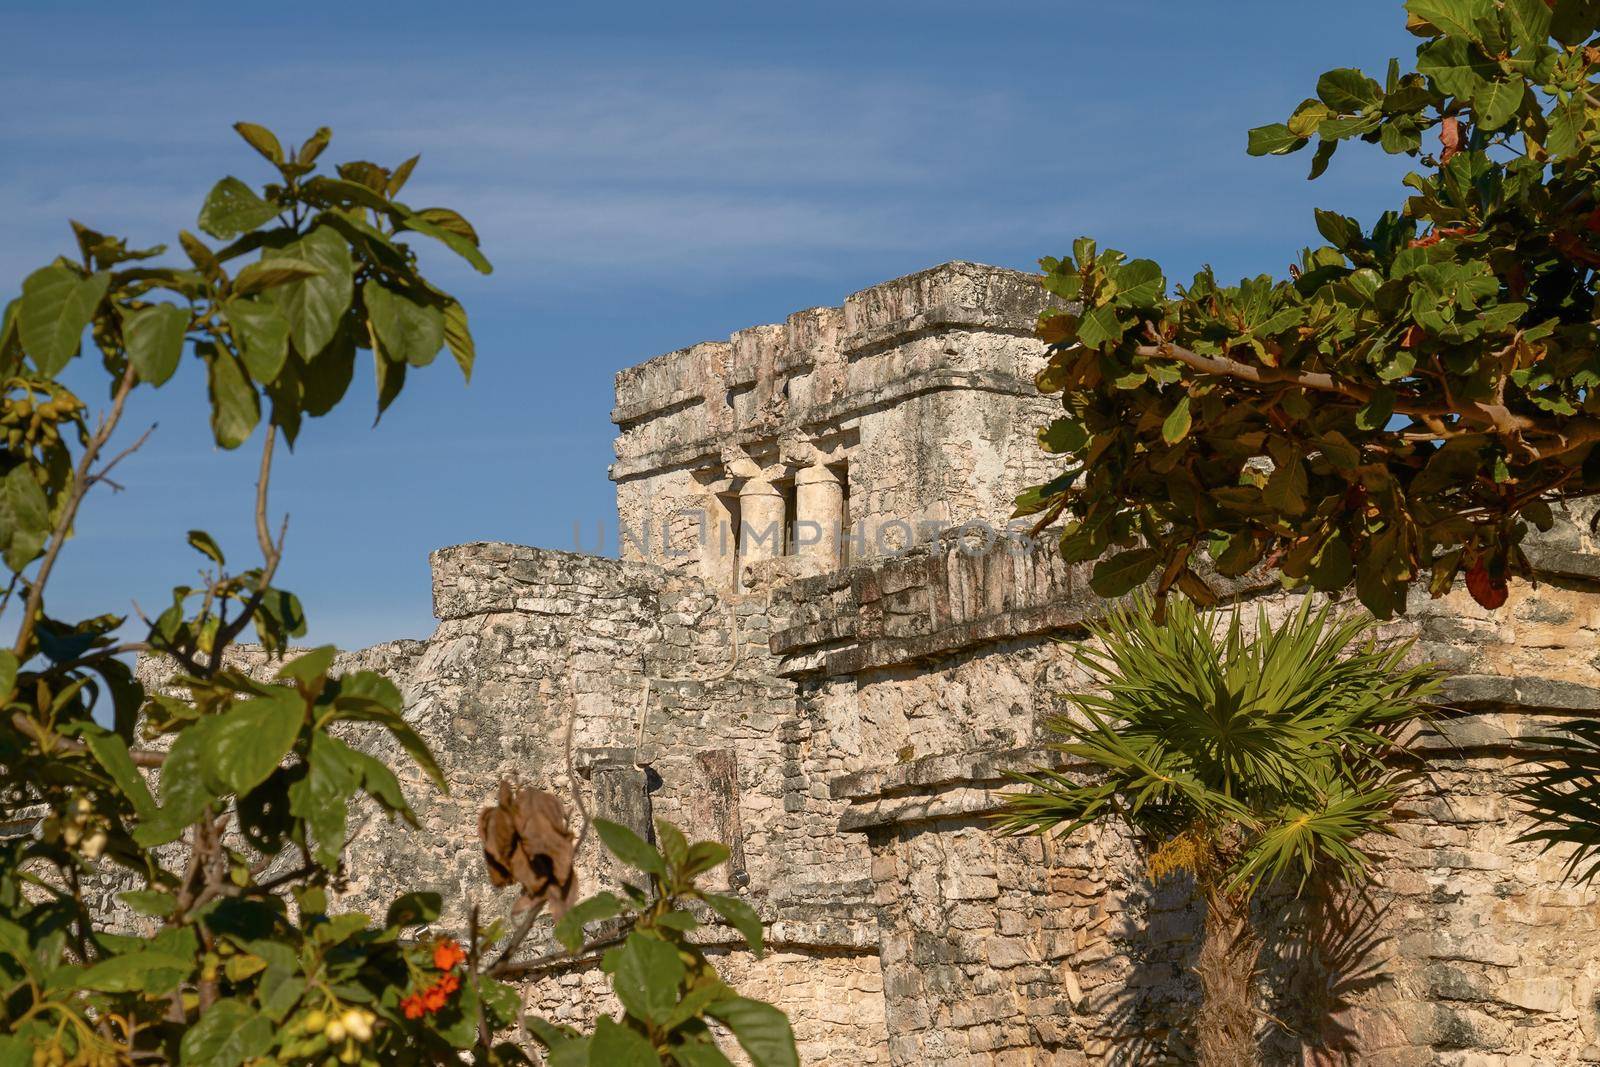 Mayan Ruins of Temple in Tulum Mexico.